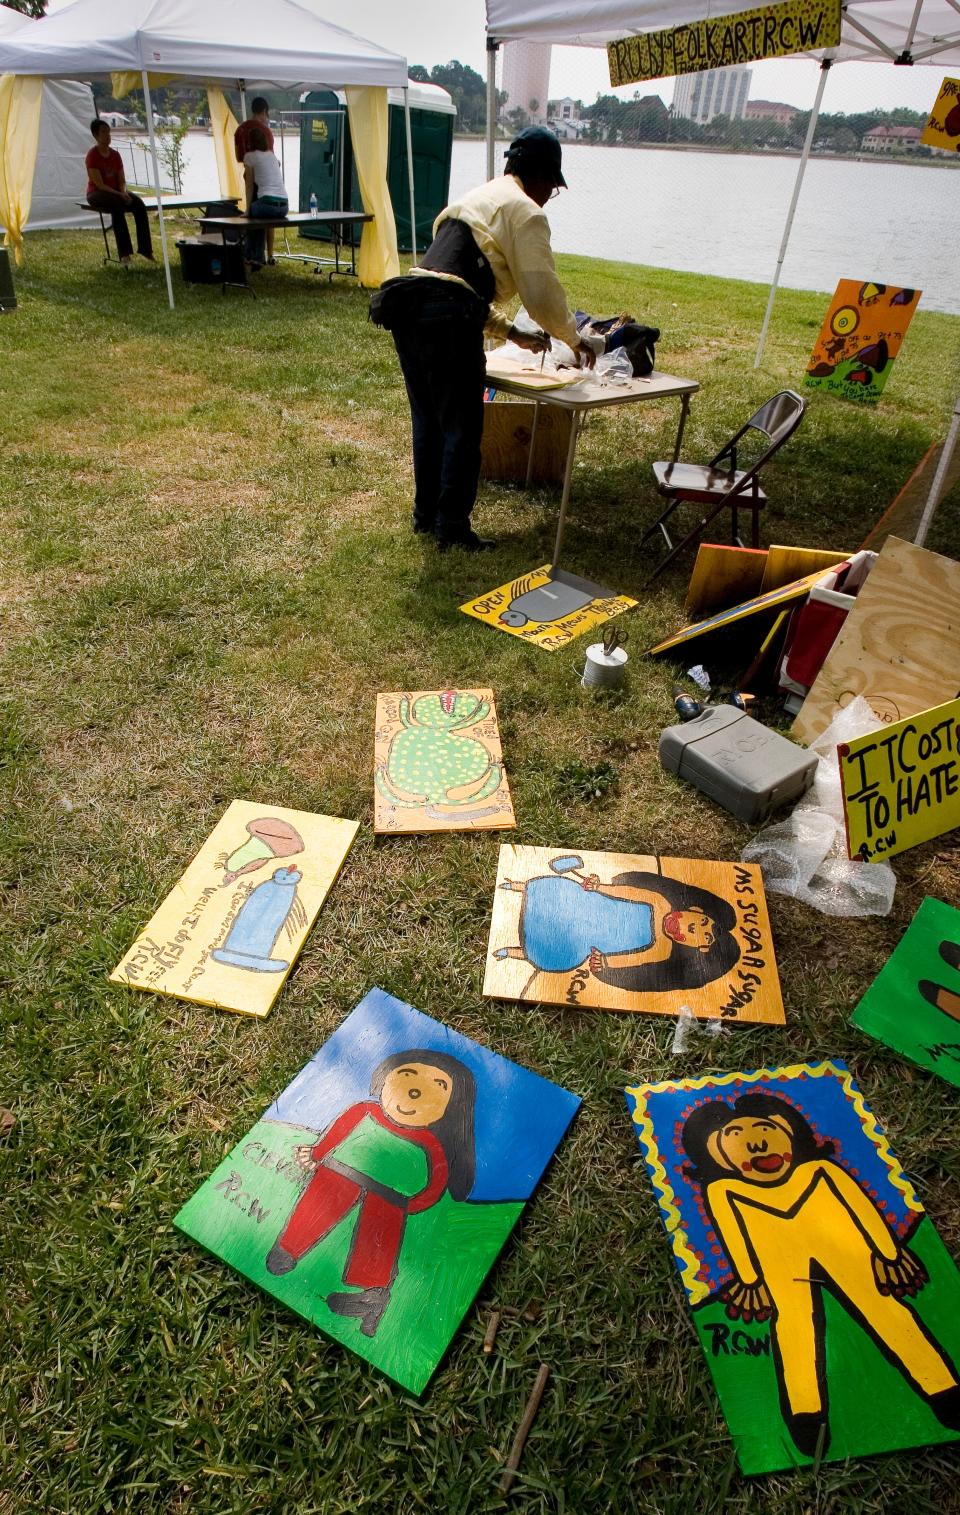 Ruby C. Williams prepares some of her paintings for display at her booth during the annual Mayfaire-by-the-Lake art festival in 2007. Williams, a self-taught artist, had her work displayed at the Smithsonian Anacostia Community Museum in Washington, D.C.